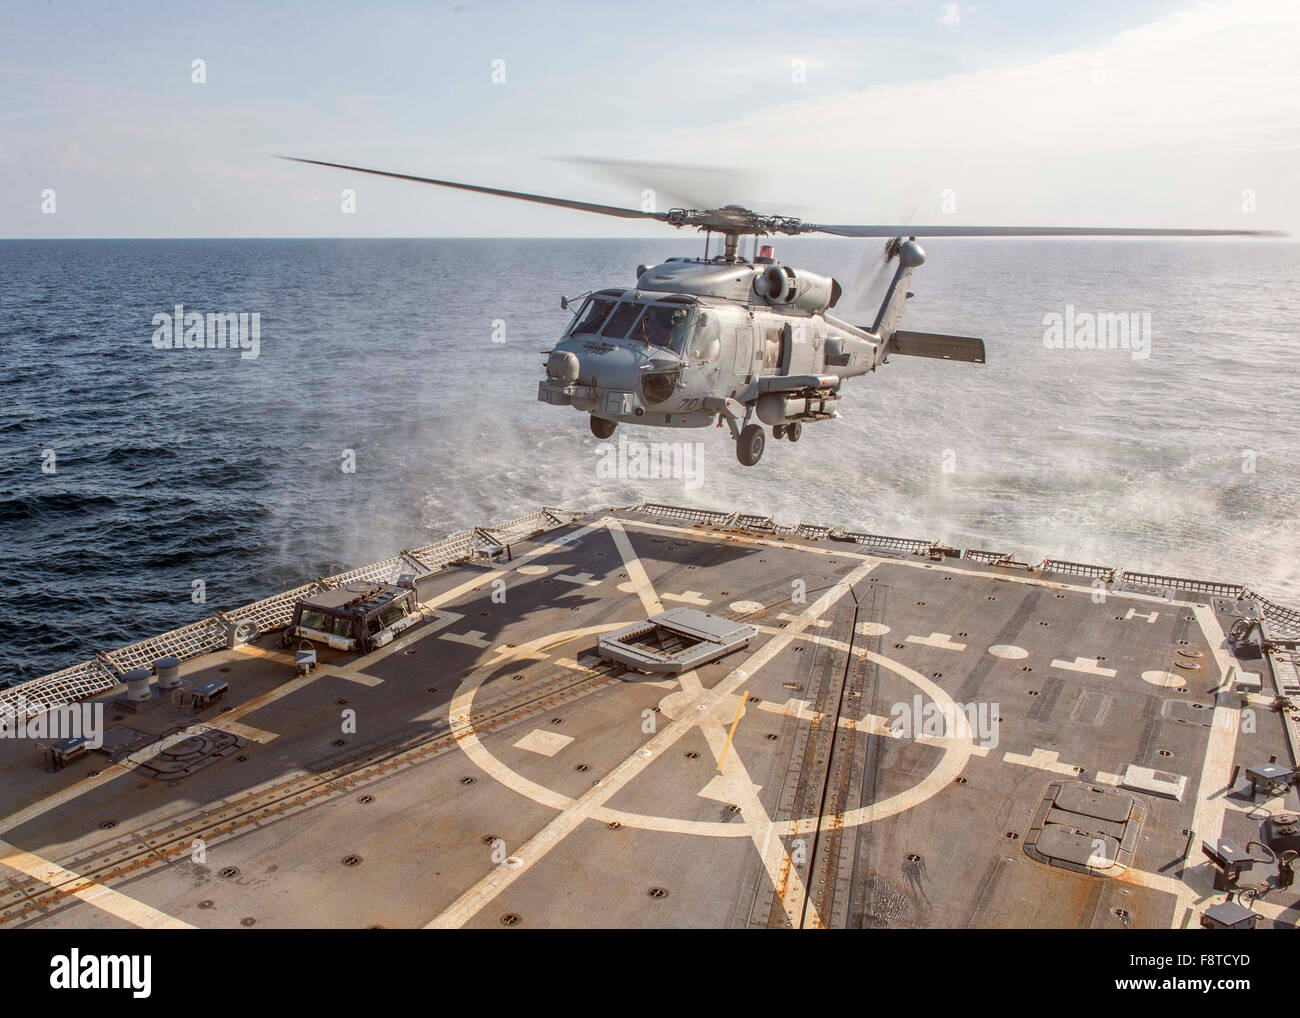 MH-60R Sea Hawk helicopter lands on the flight deck of guided-missile destroyer USS Bulkeley Stock Photo